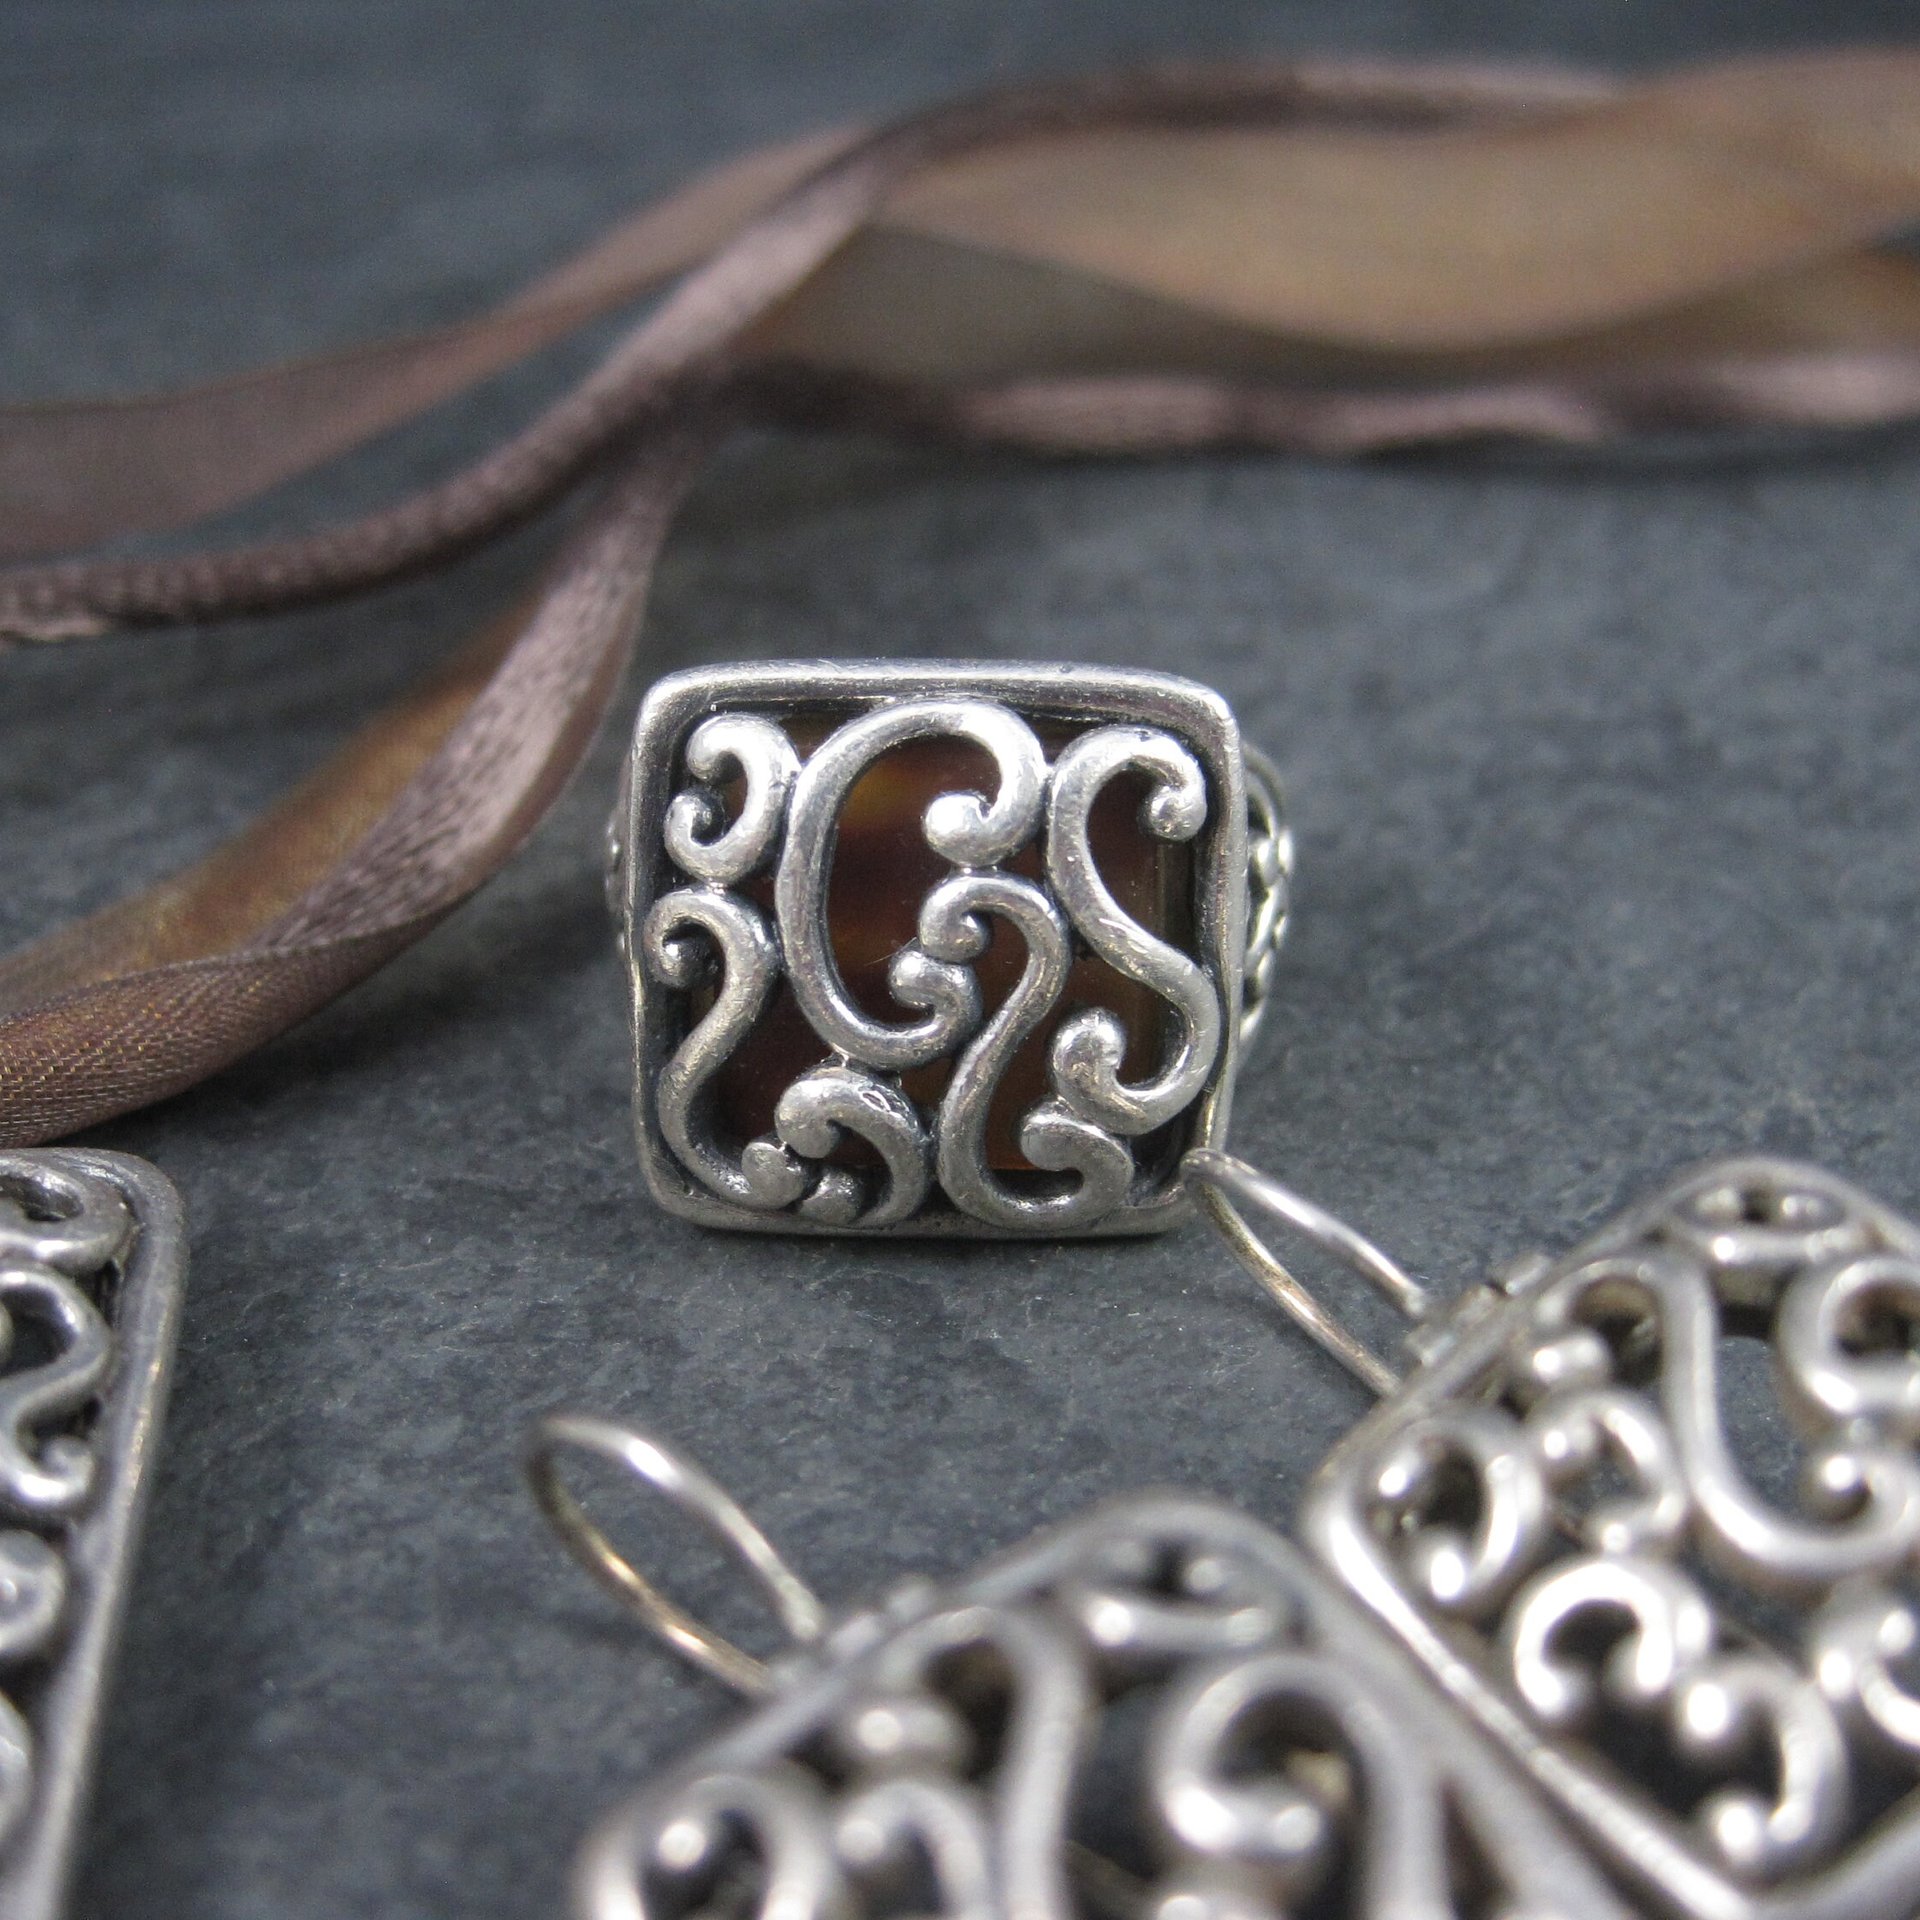 Vintage 90s Filigree Jewelry Set Sterling Necklace Earrings Ring Size 7